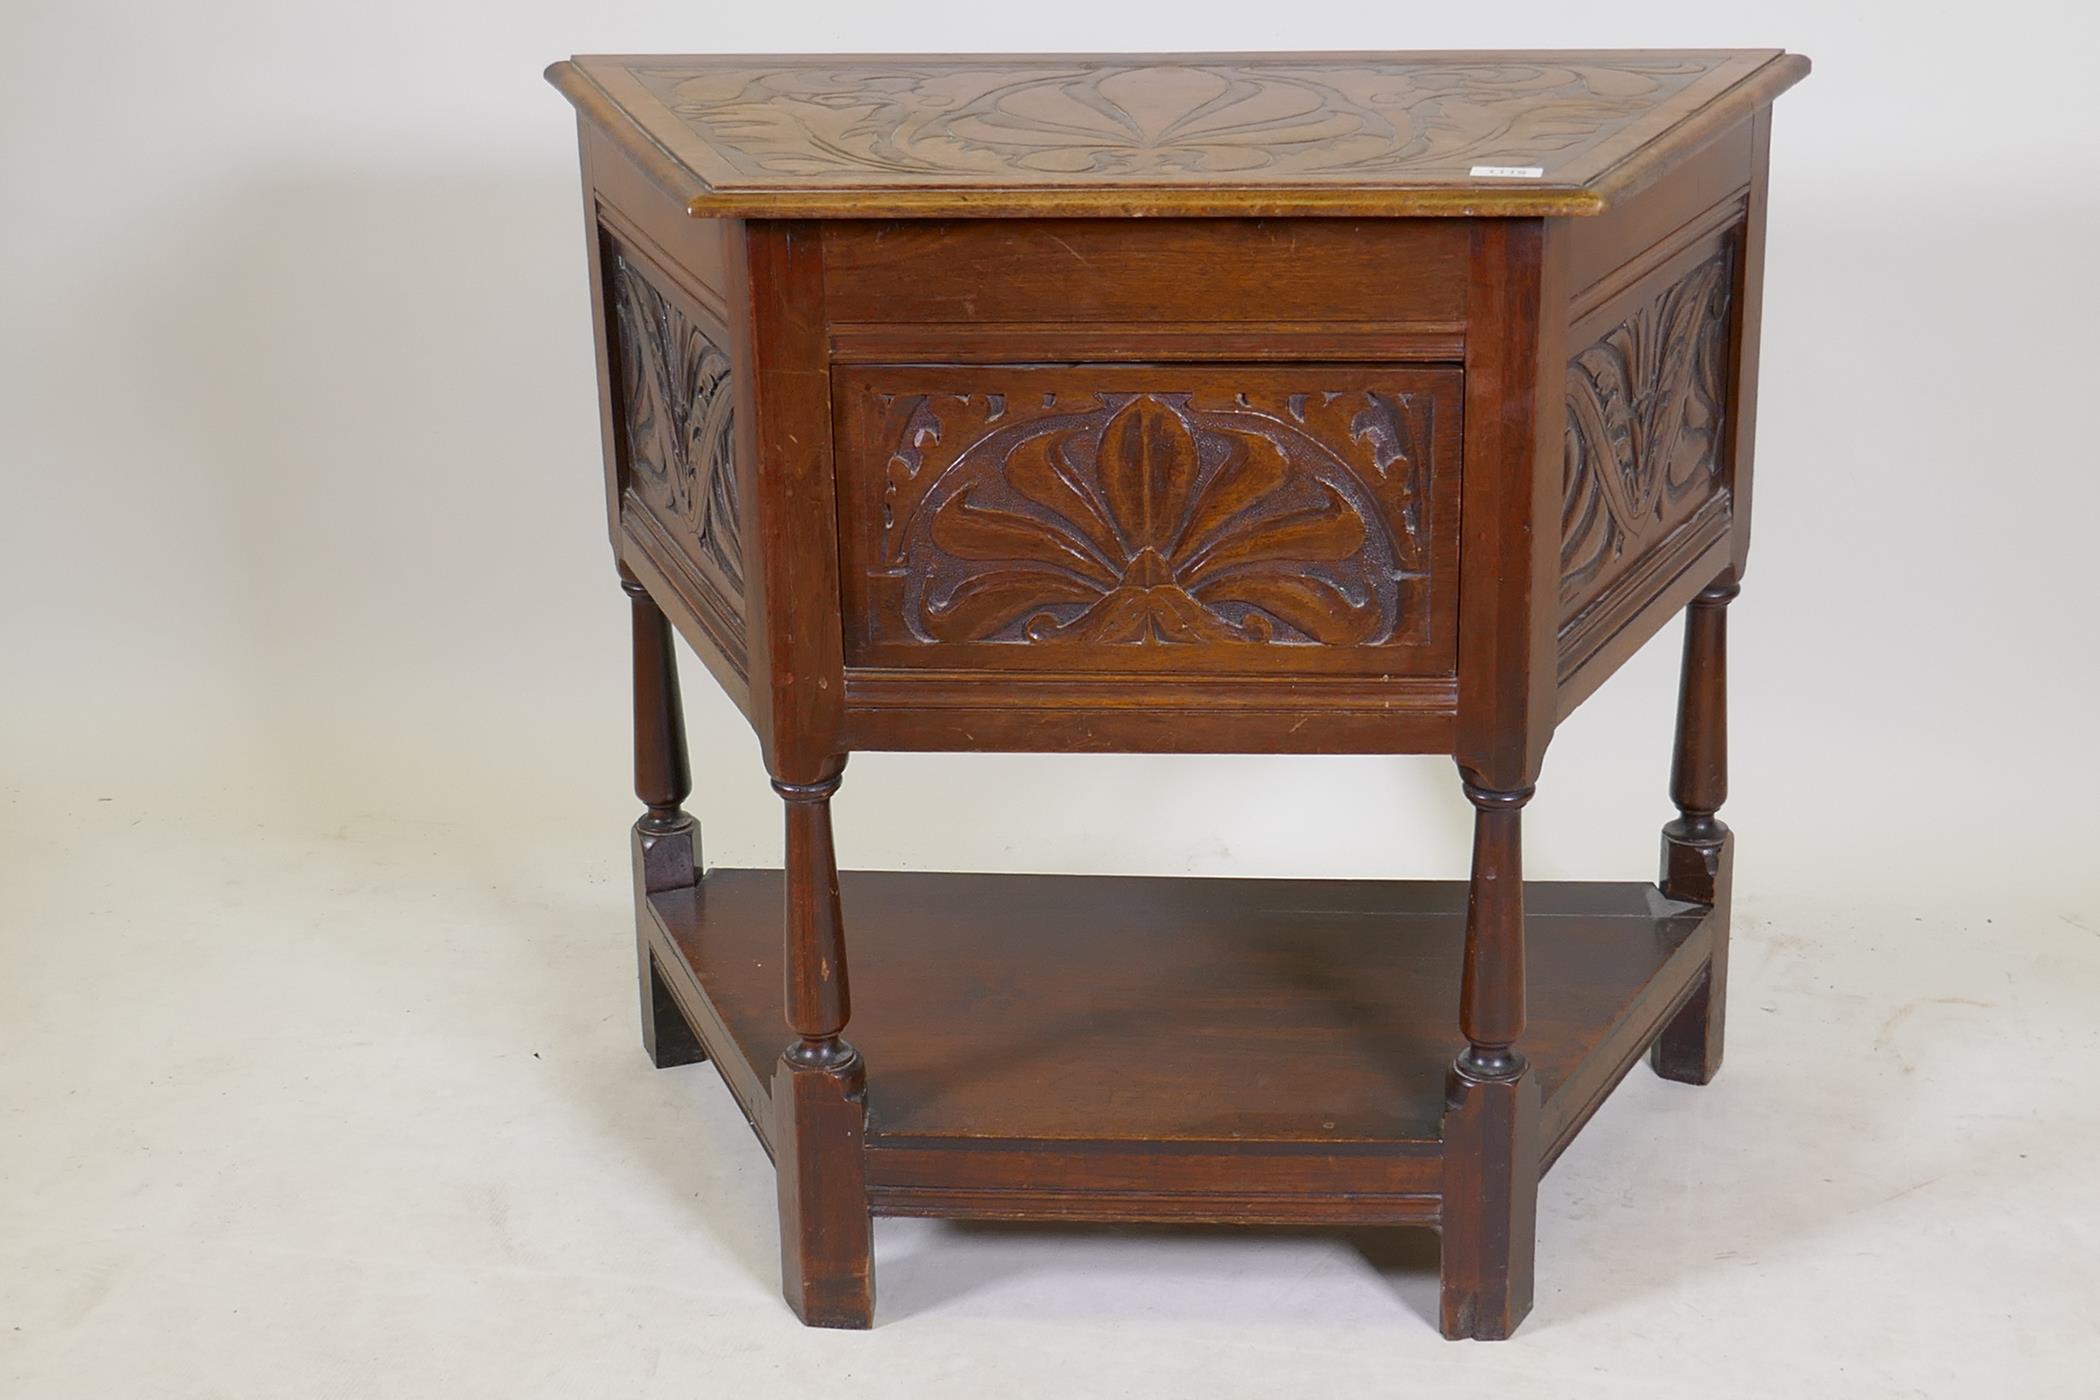 An early C20th walnut credence cabinet with carved panels and turned supports united by an